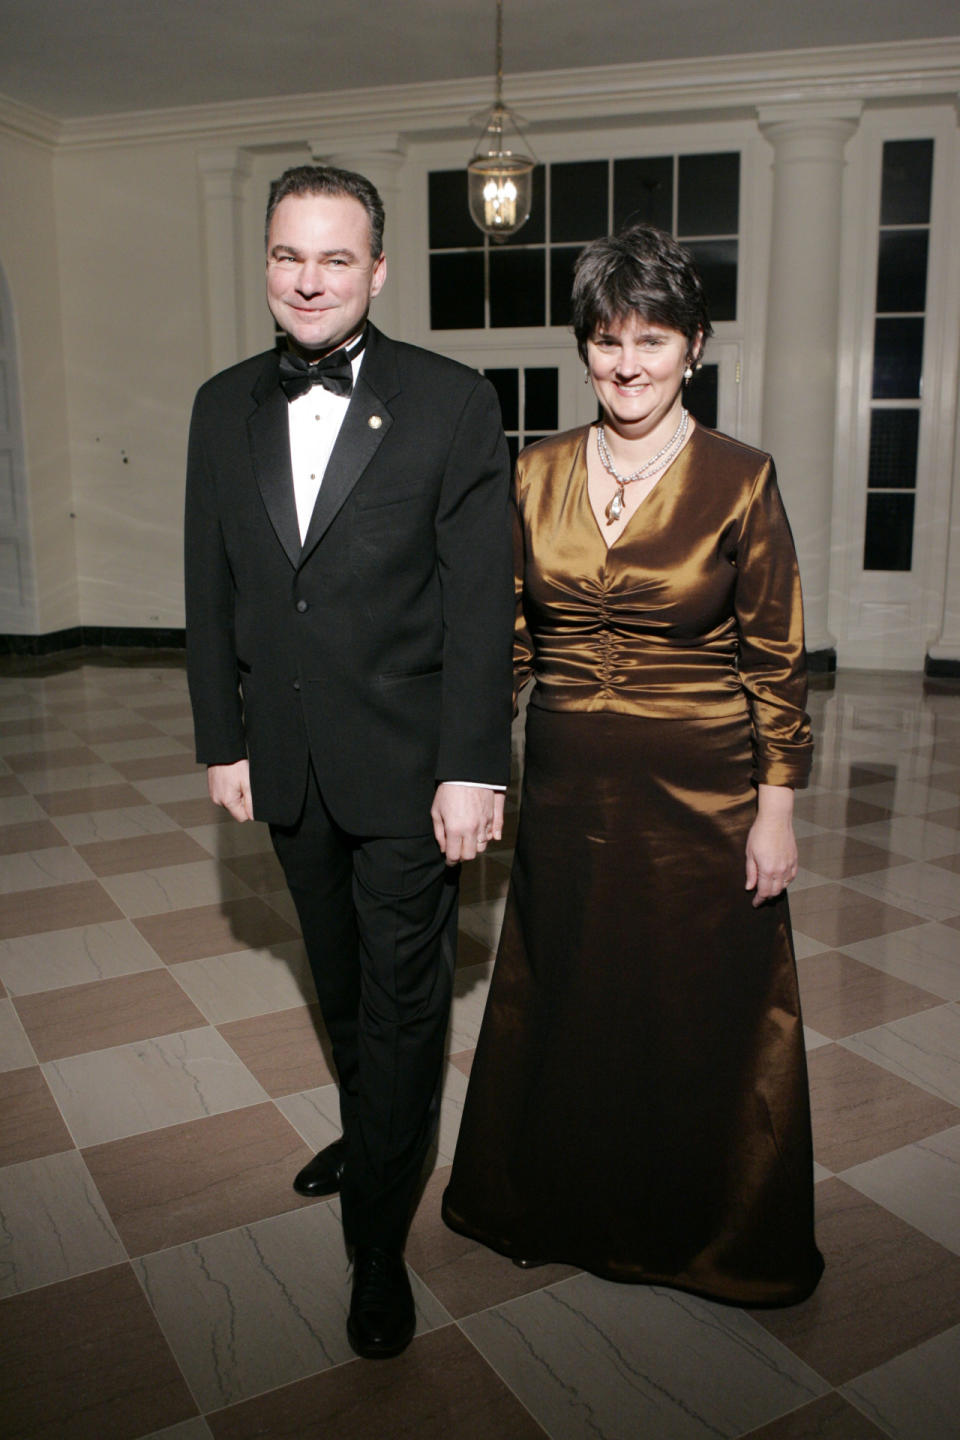 <p>Virginia Gov. Tim Kaine arrives at the White House with his wife, Anne Holton, at the annual state dinner for the nation’s governors, Feb. 26, 2006. (Photo: Manuel Balce Ceneta/AP)</p>